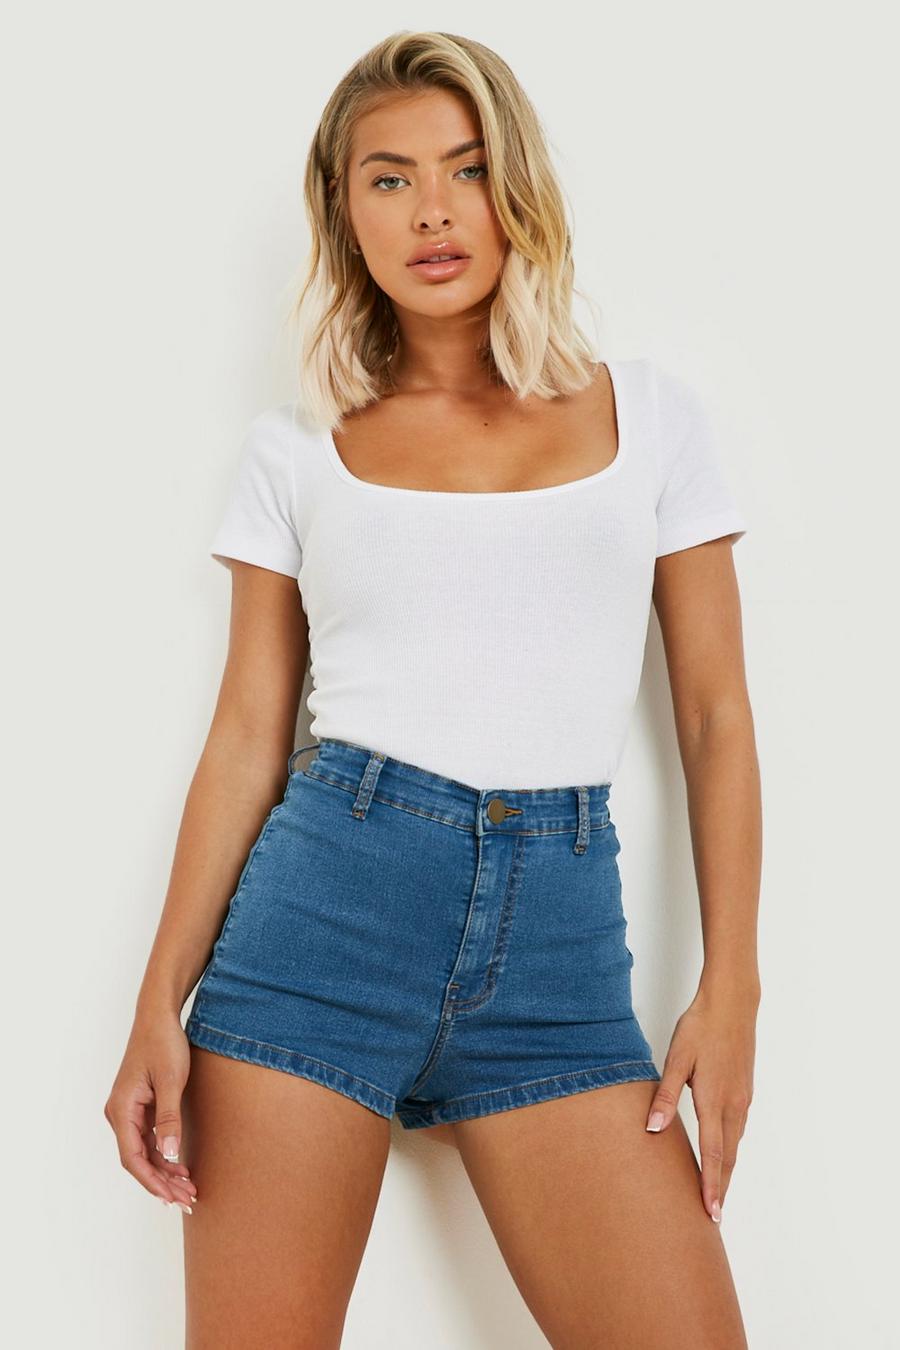 Stretchy Mid Waist Denim Shorts For Women Casual Petite Shorts